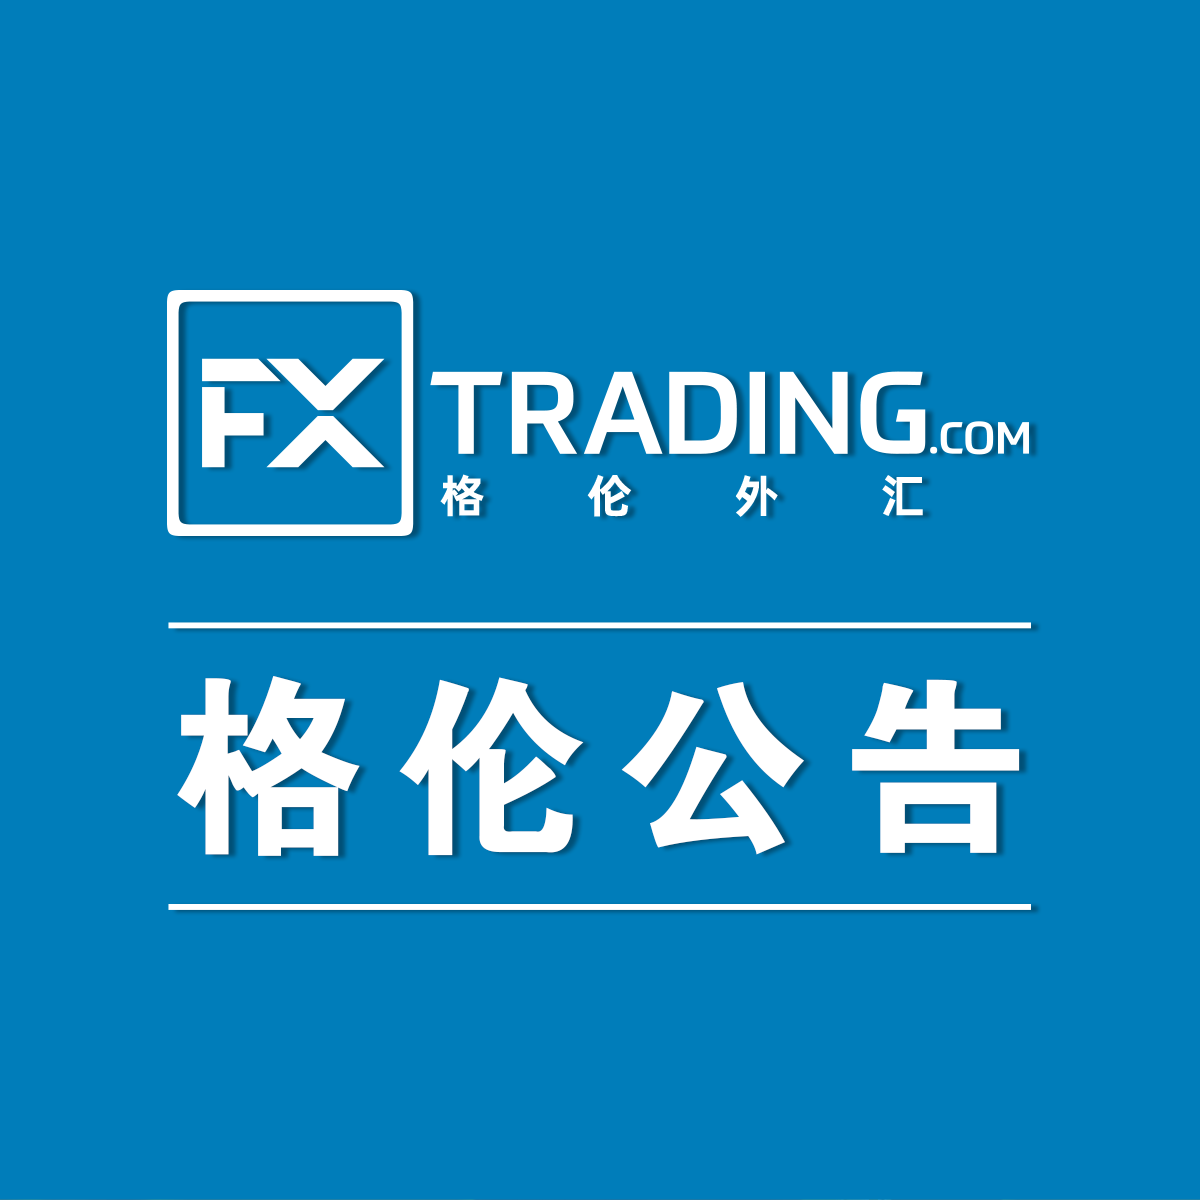 FXTRADING.com  Announcement FX110 CNS - 1200x1200.png